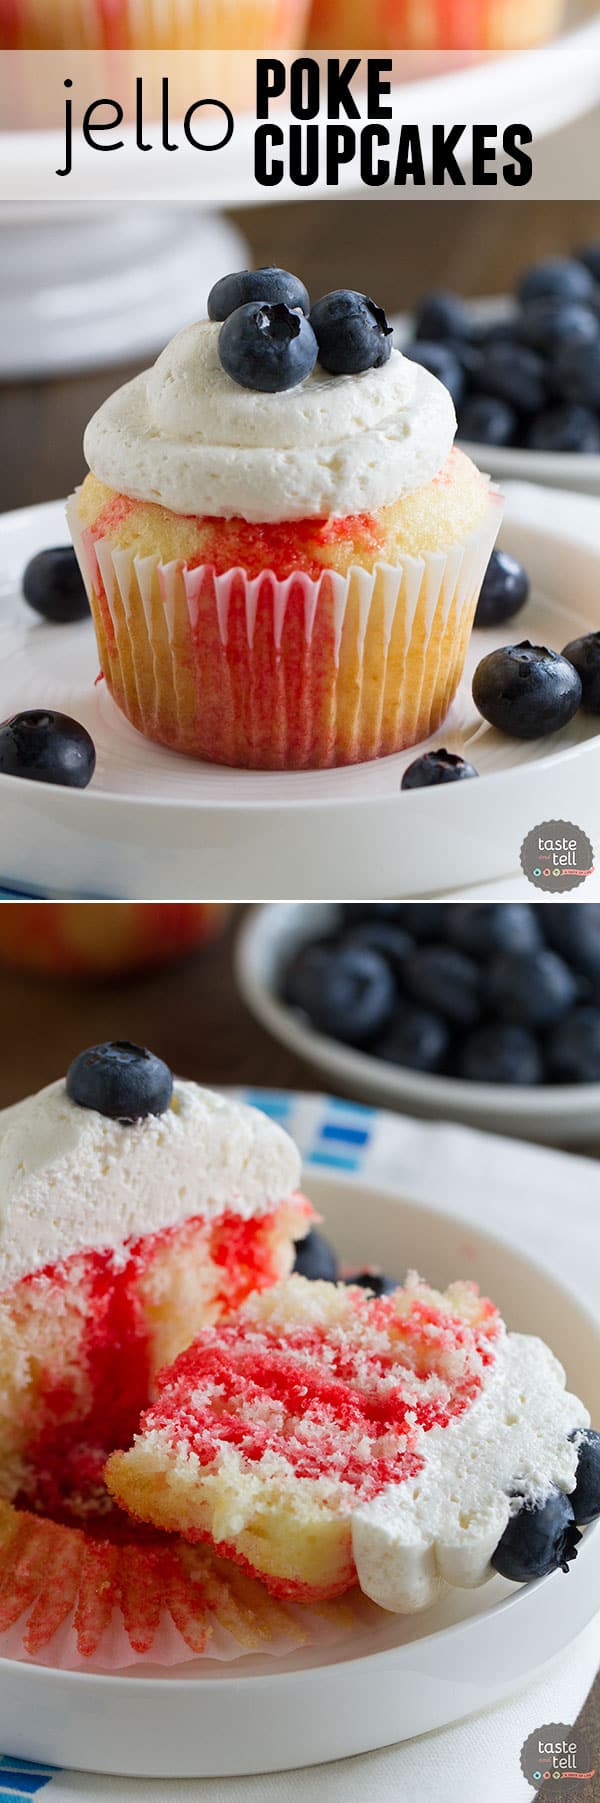 Cupcakes go patriotic with these Jello Poke Cupcakes that are streaked with red, then topped with white and blue. You can easily change the jello flavor and the topping for different holidays or flavors.